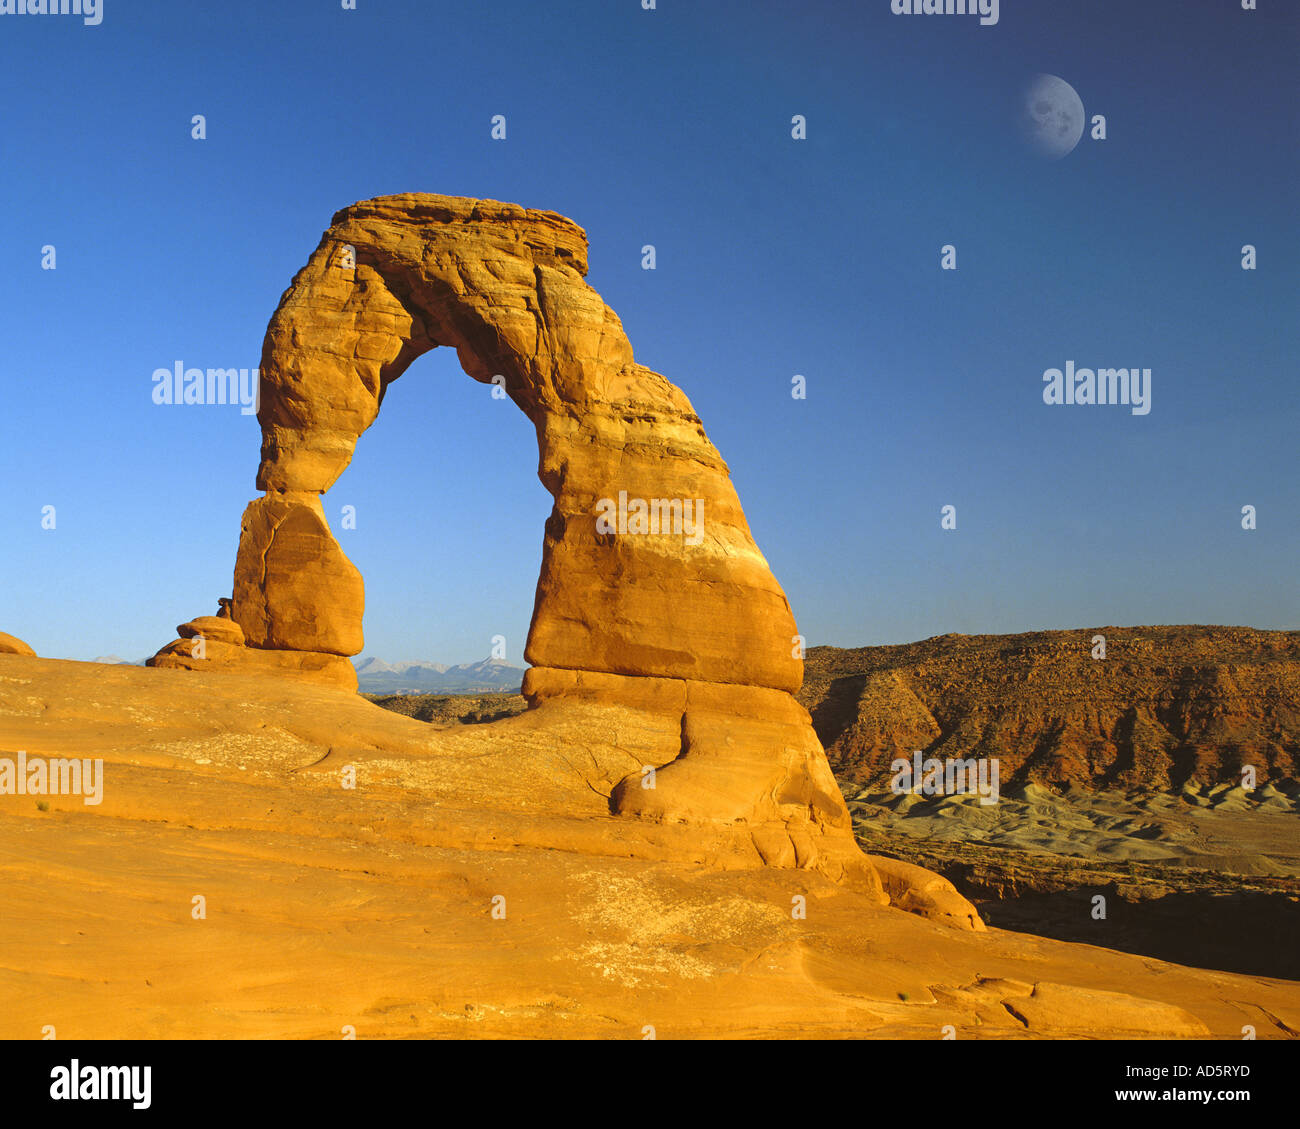 USA - UTAH: Delicate Arch at Arches National Park Stock Photo